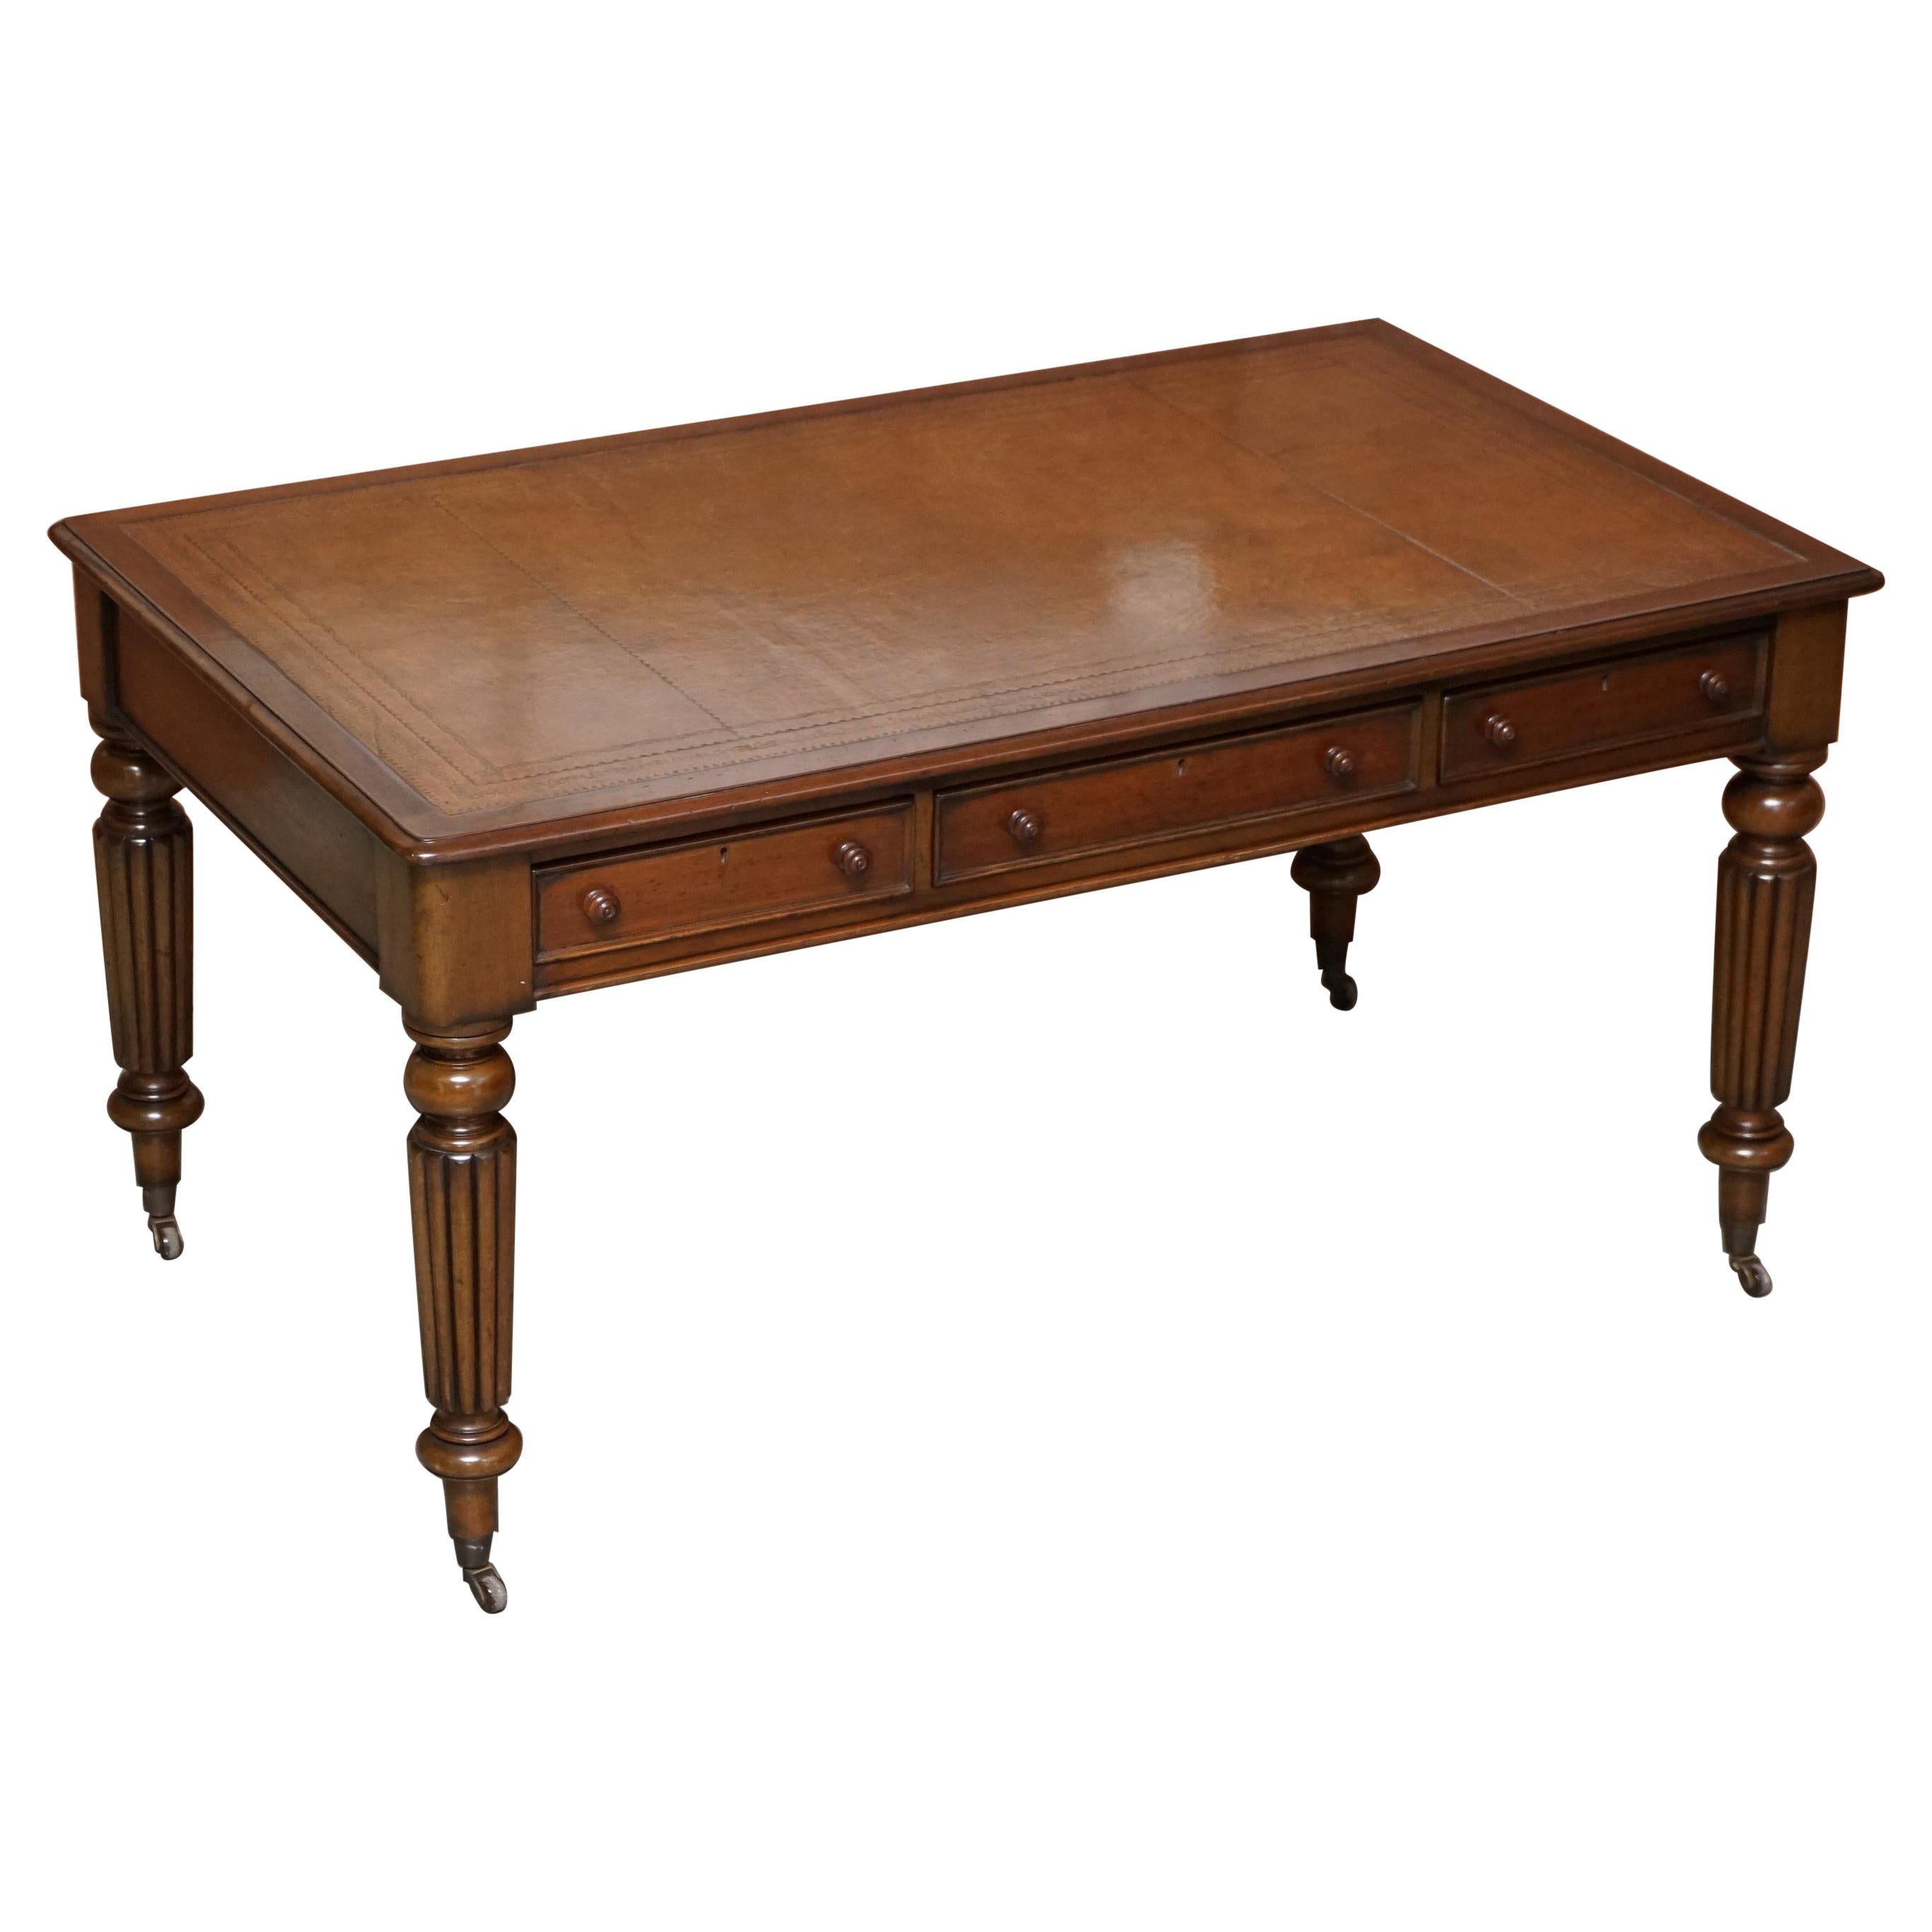 Restored Victorian Library Writing Table or Desk Brown Leather Top Gillows Legs